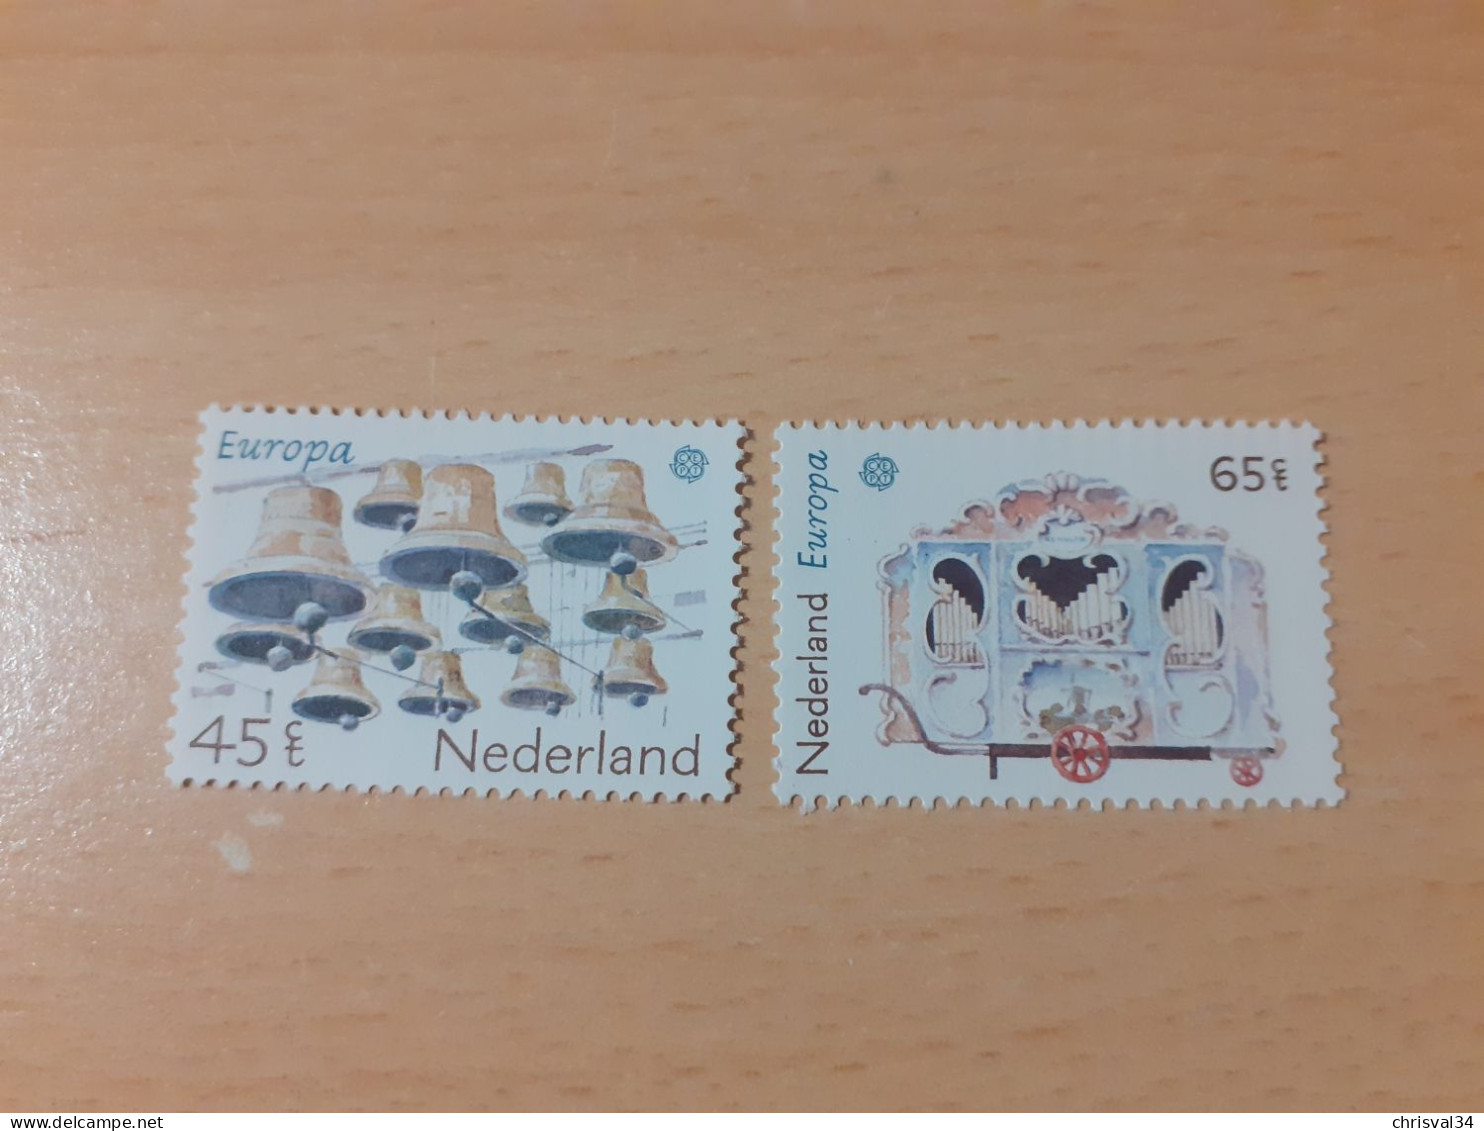 TIMBRES   EUROPA   1981  PAYS-BAS   N  1156  /  1157   COTE  2,00  EUROS    NEUFS  LUXE** - 1981